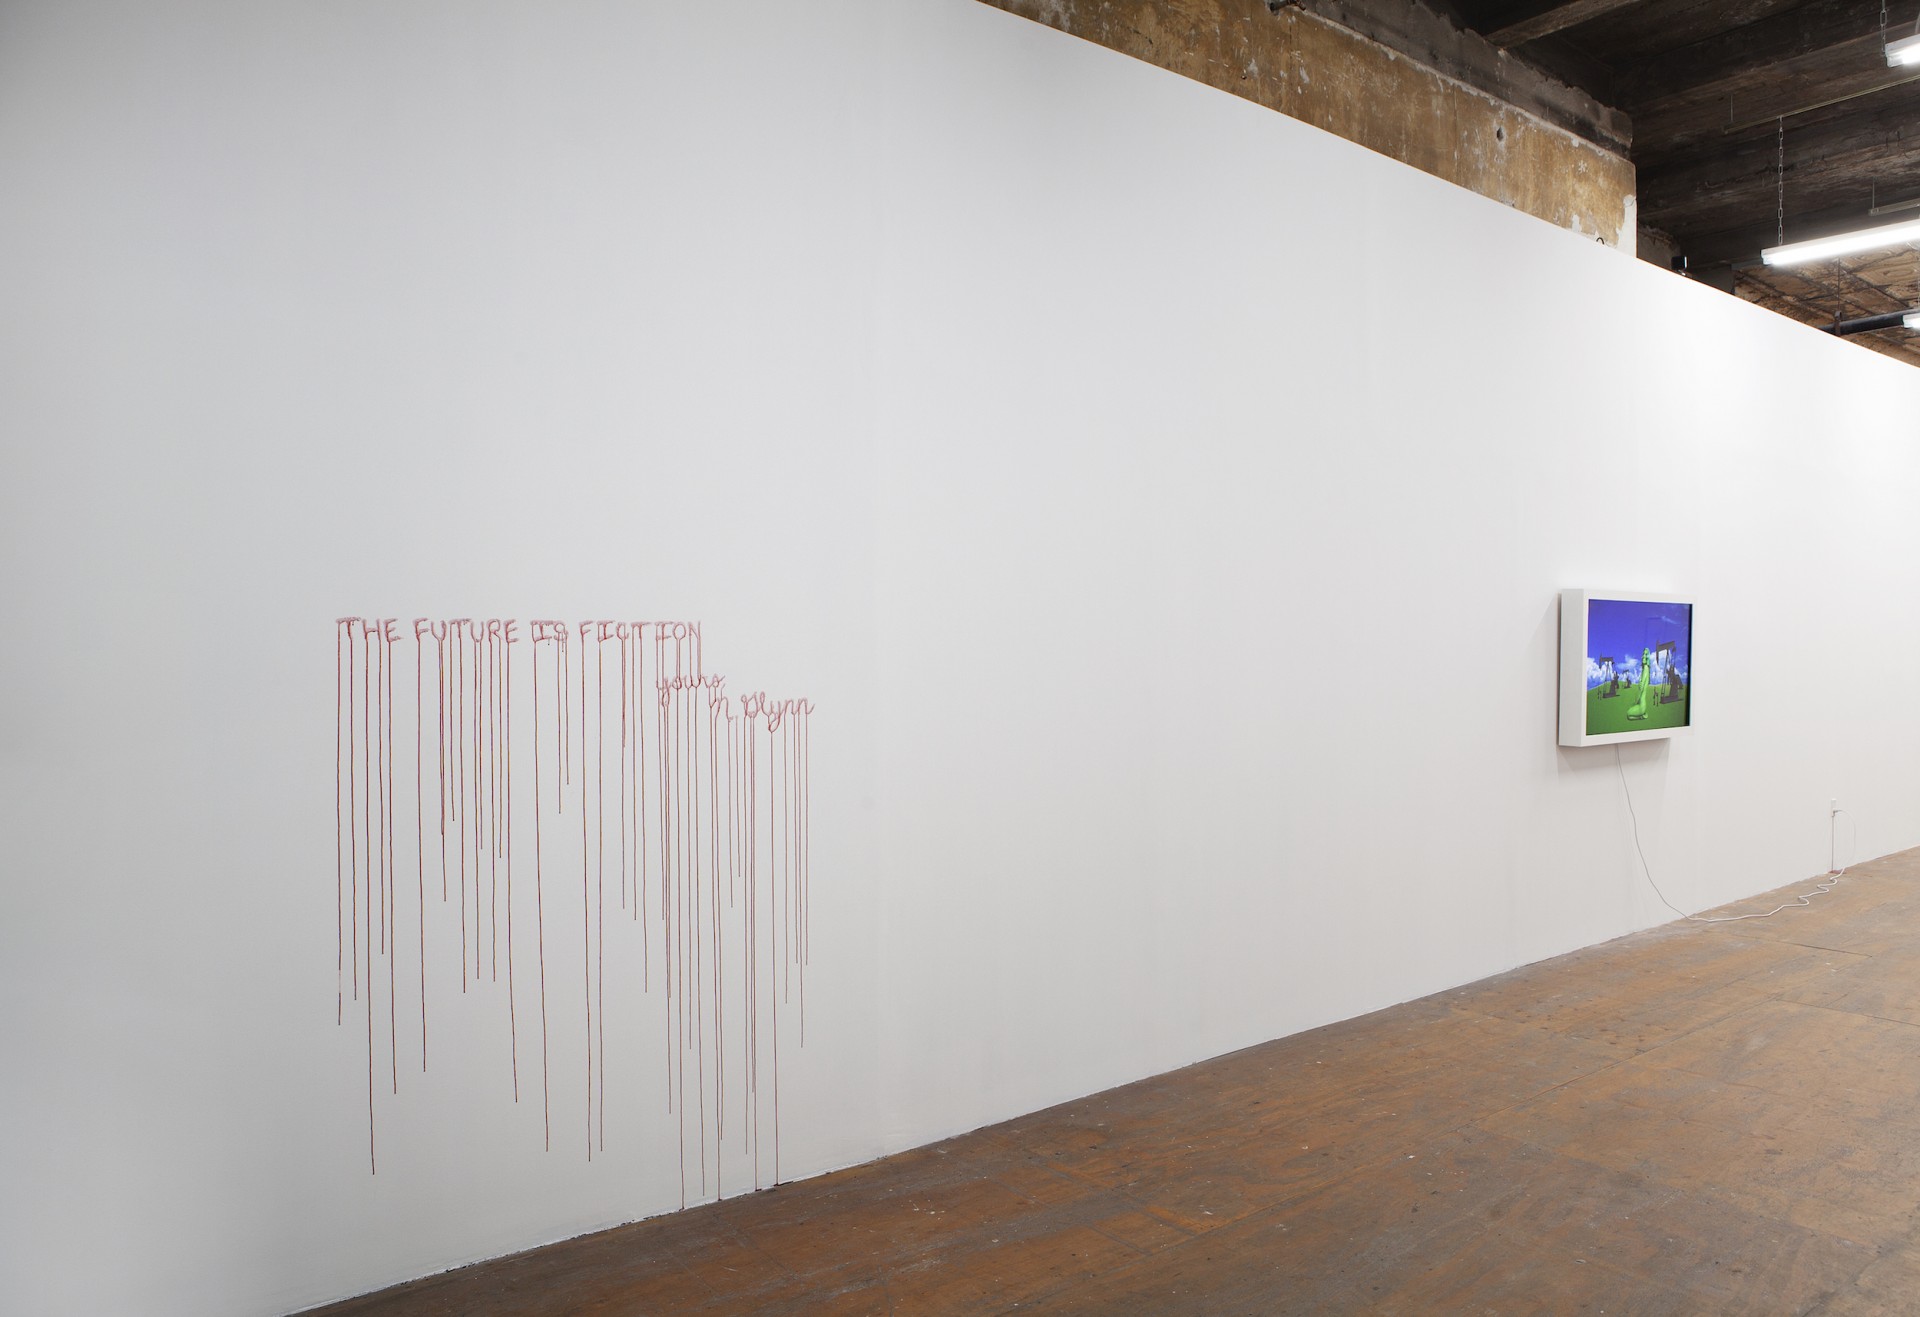 Nash Glynn, *The Future is Fiction*. Installation view